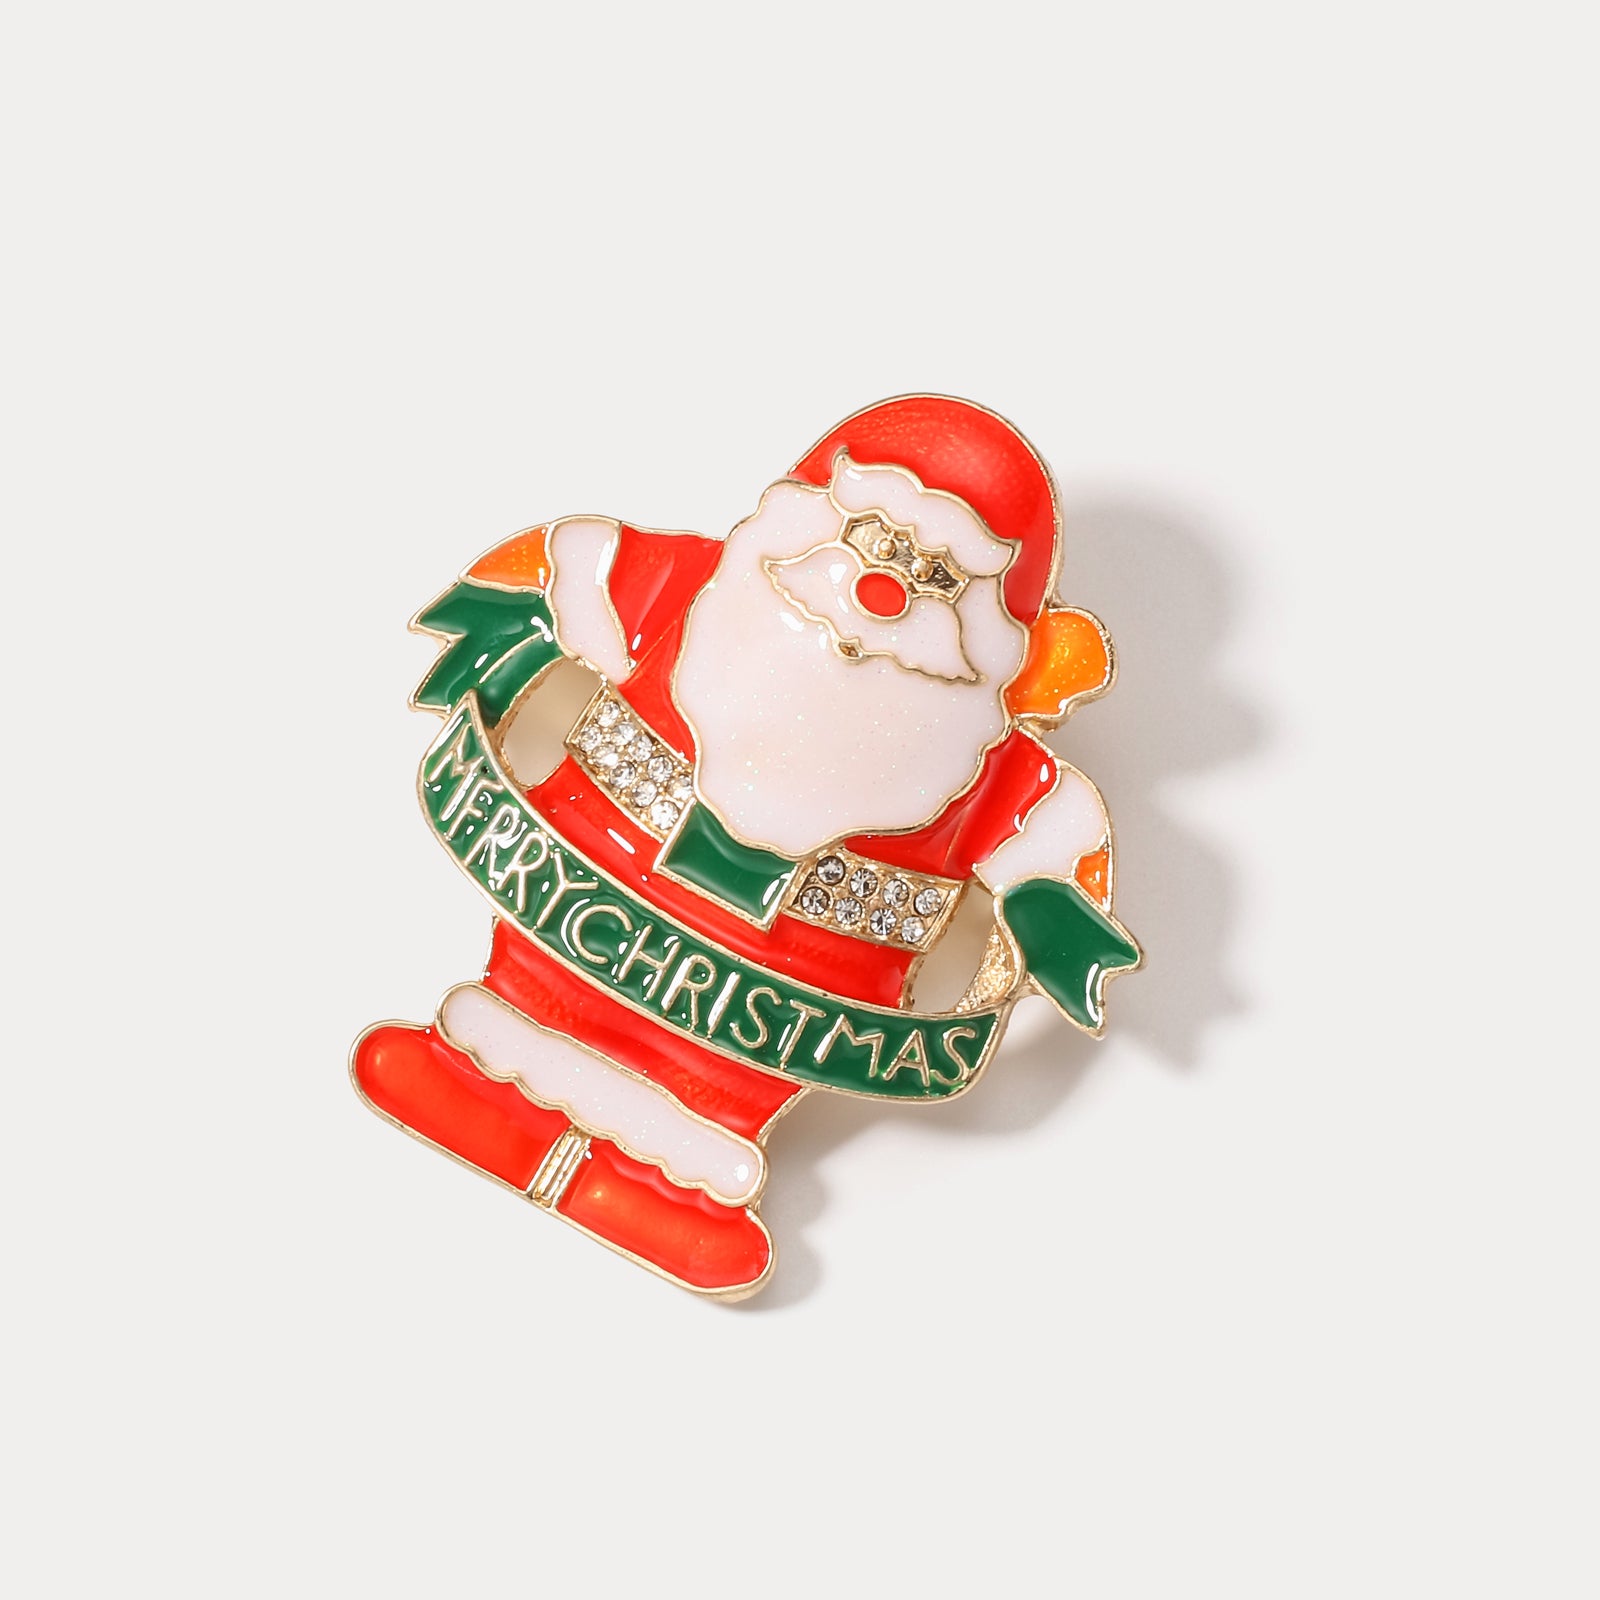 Santa Claus Brooch Christmas Gift for Her